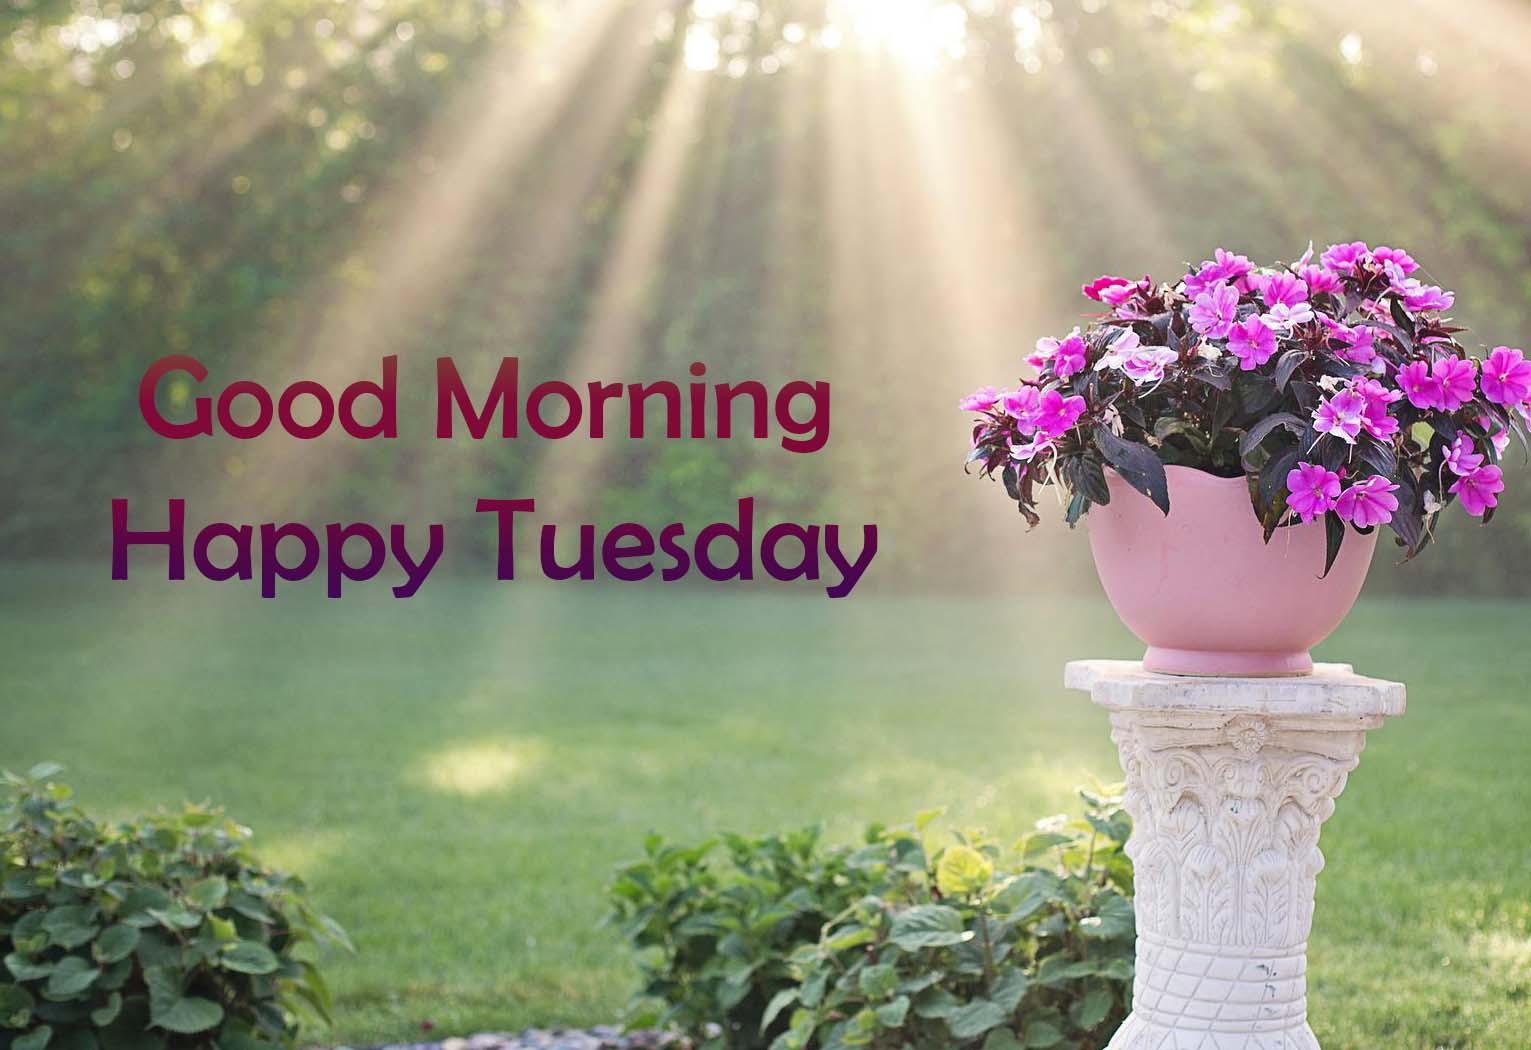 Good Morning Happy Tuesday Latest Images